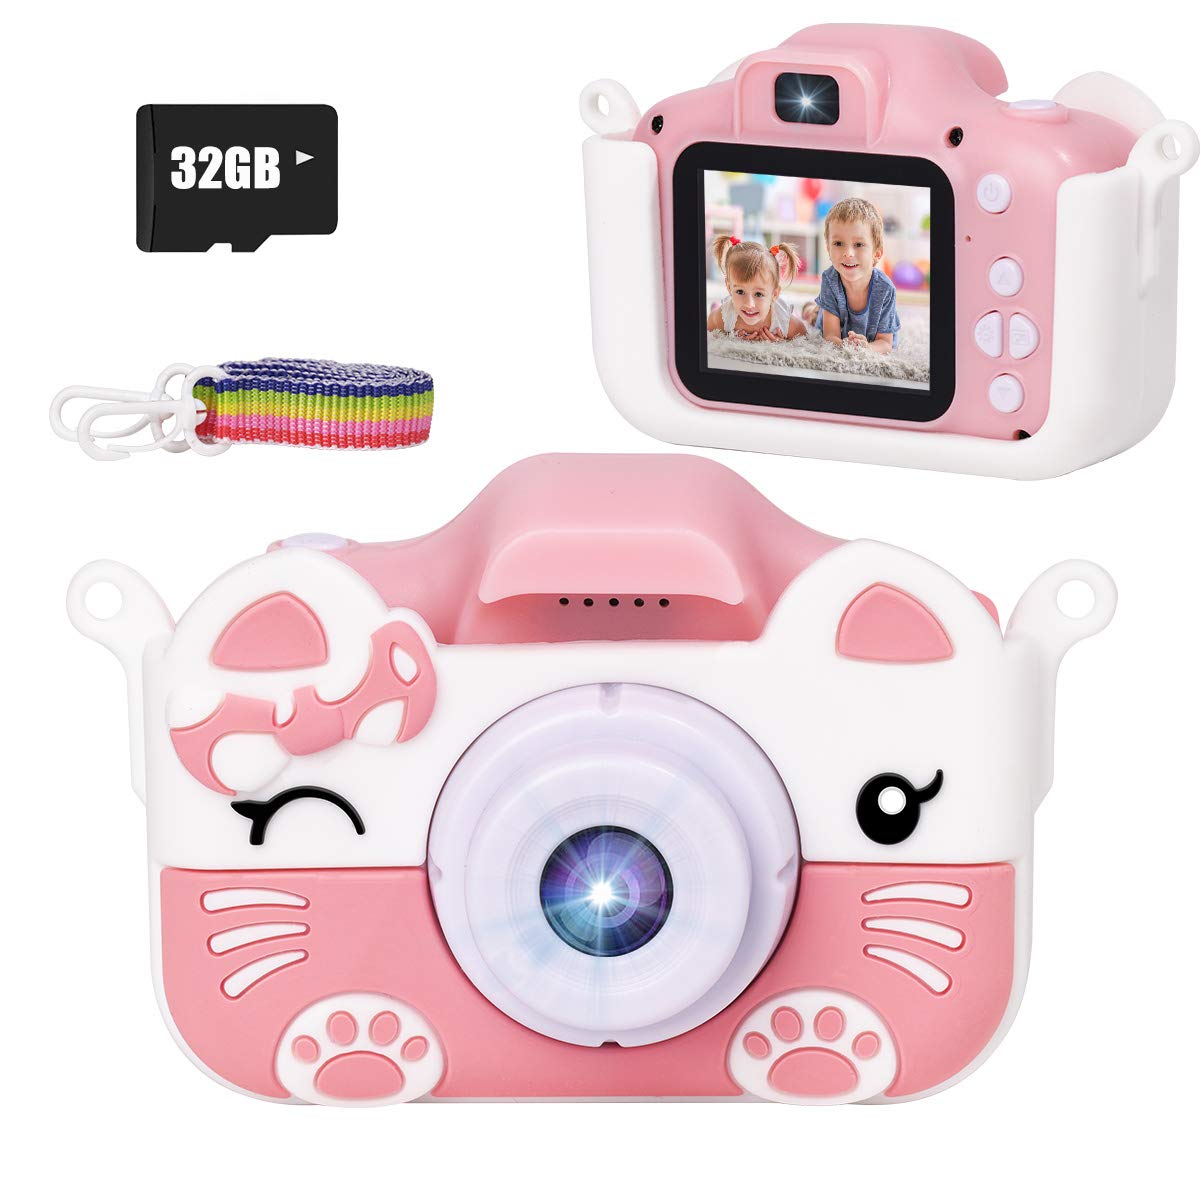 JLtech Kids Selfie Digital Camera，Birthday Toy Gift for Girls Age 2-10 , Children Cameras for Toddler with 1080P Video，Portable and Rechargeable Toy Camera for Girls with 32GB SD Card (Pink)